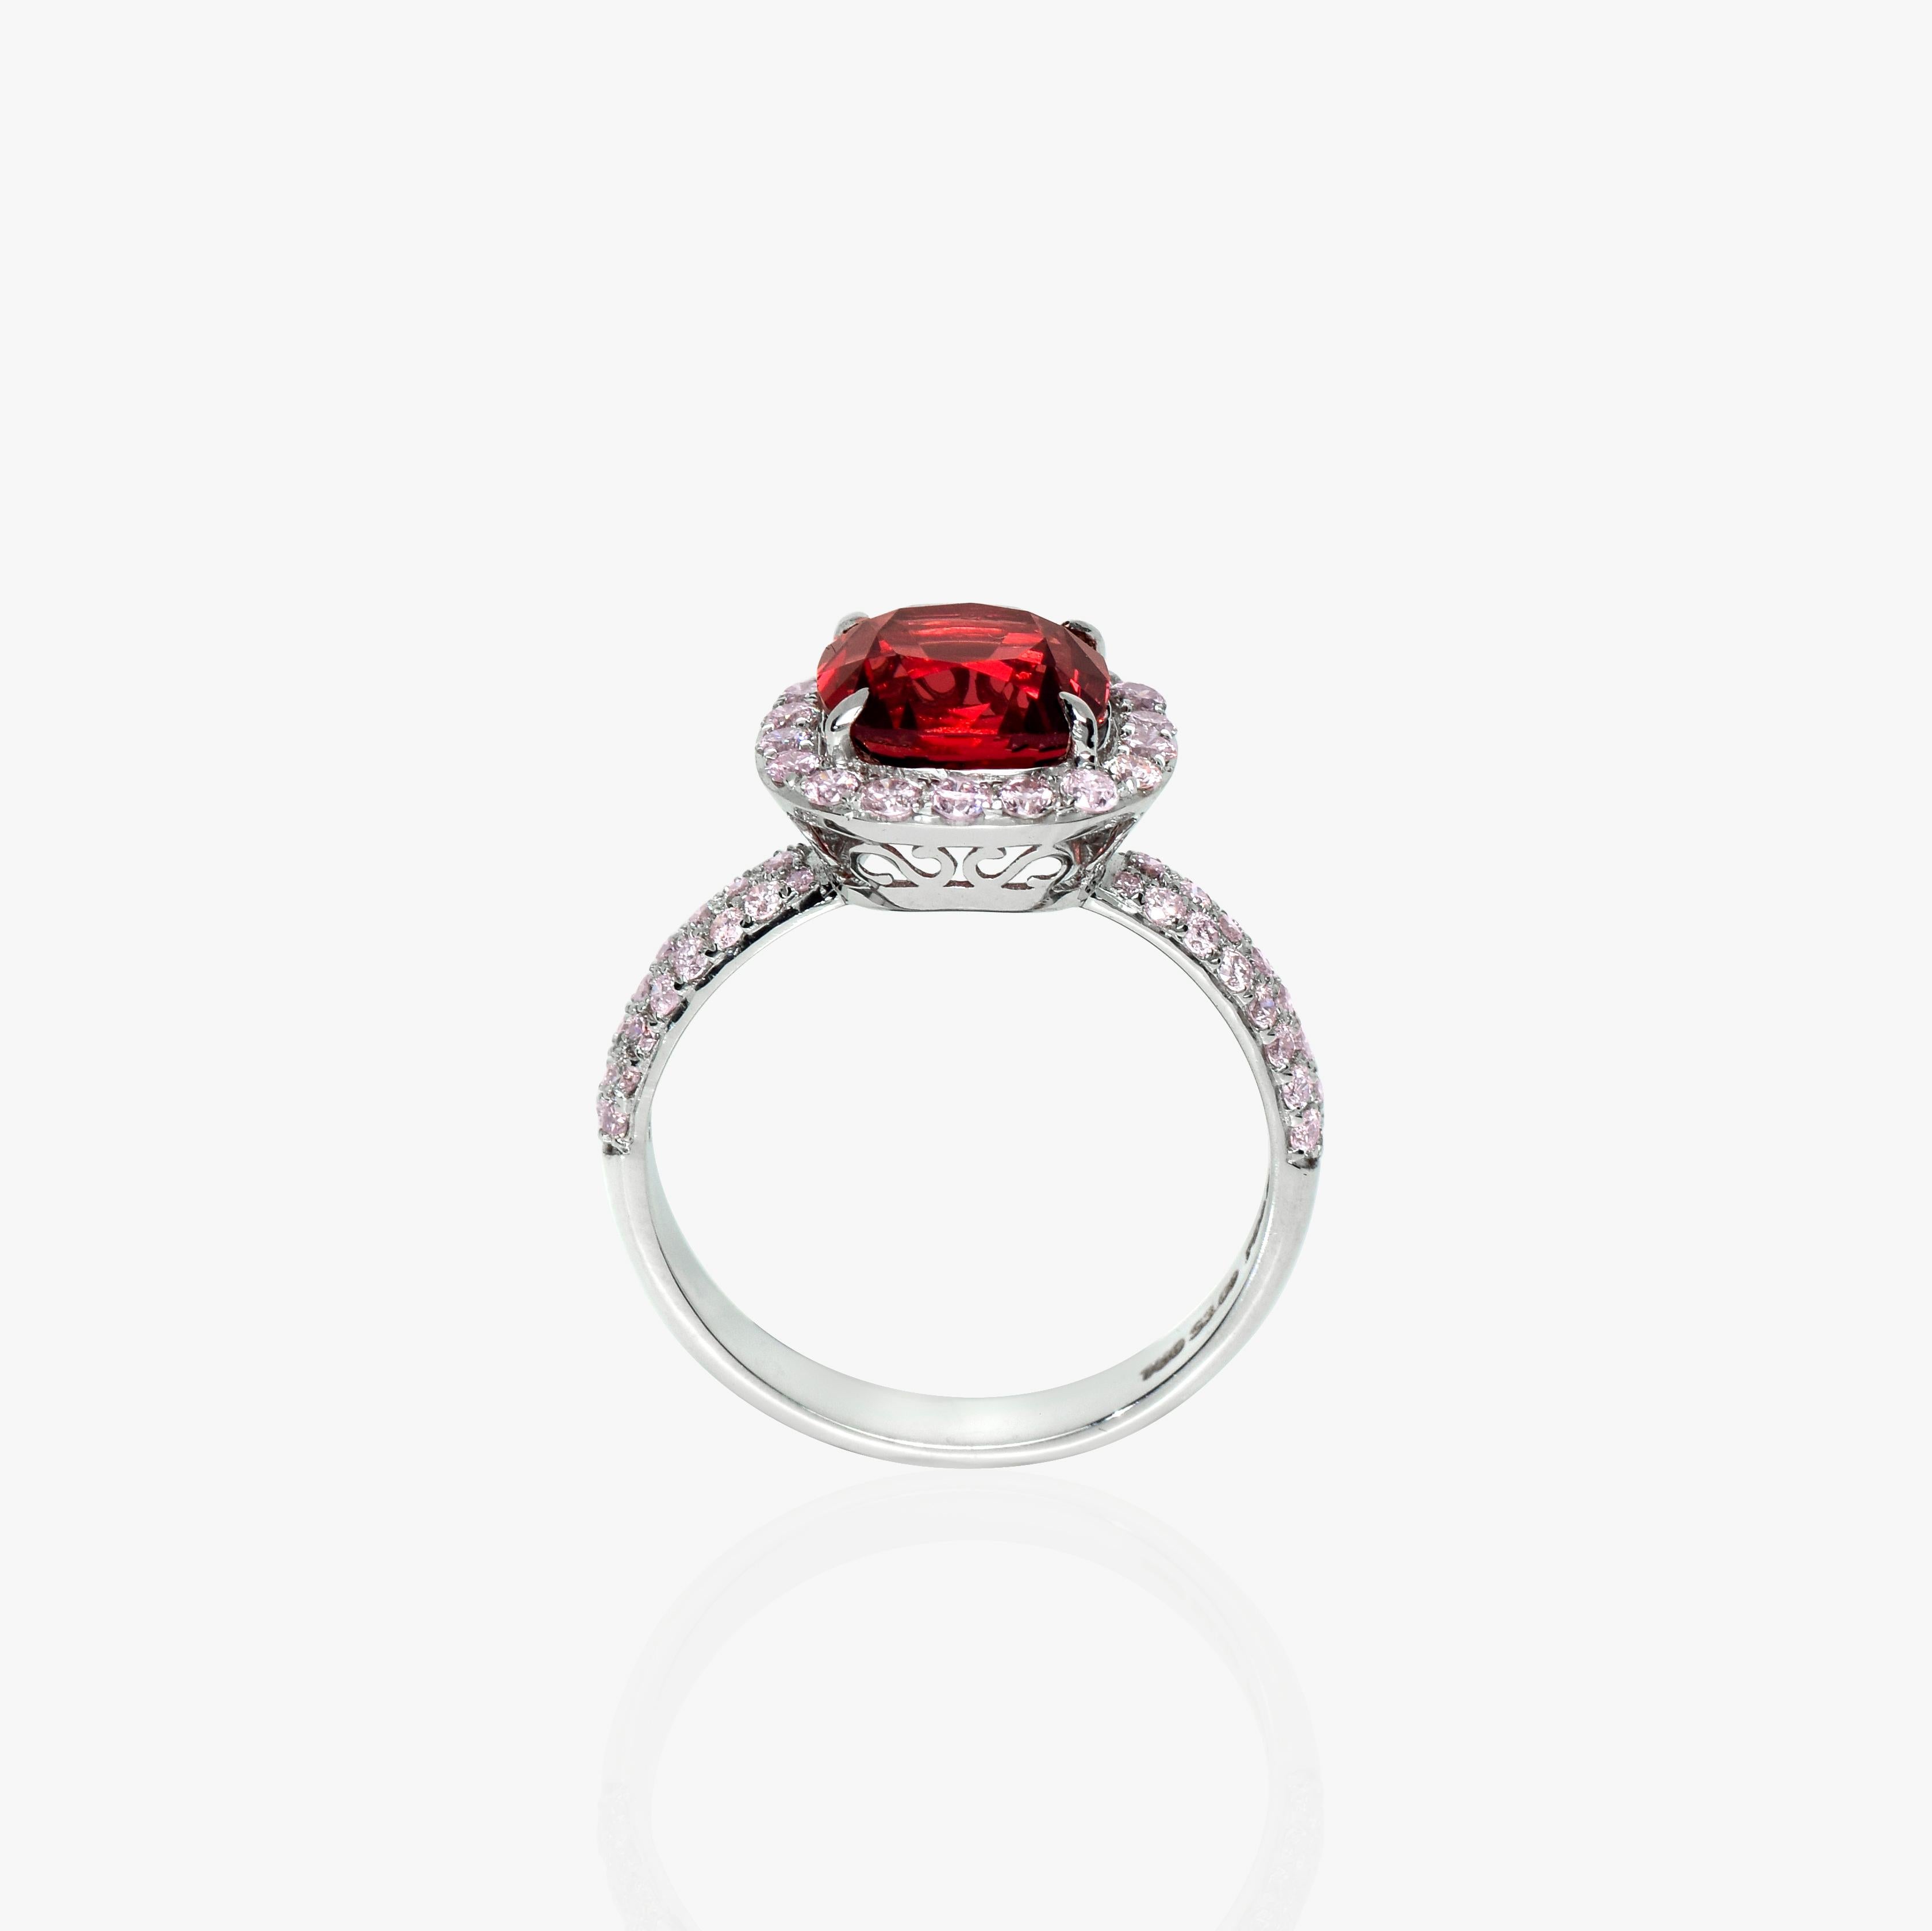 IGI 18K 3.09 Ct Red Spinel&Pink Diamonds Antique Engagement Ring In New Condition For Sale In Kaohsiung City, TW